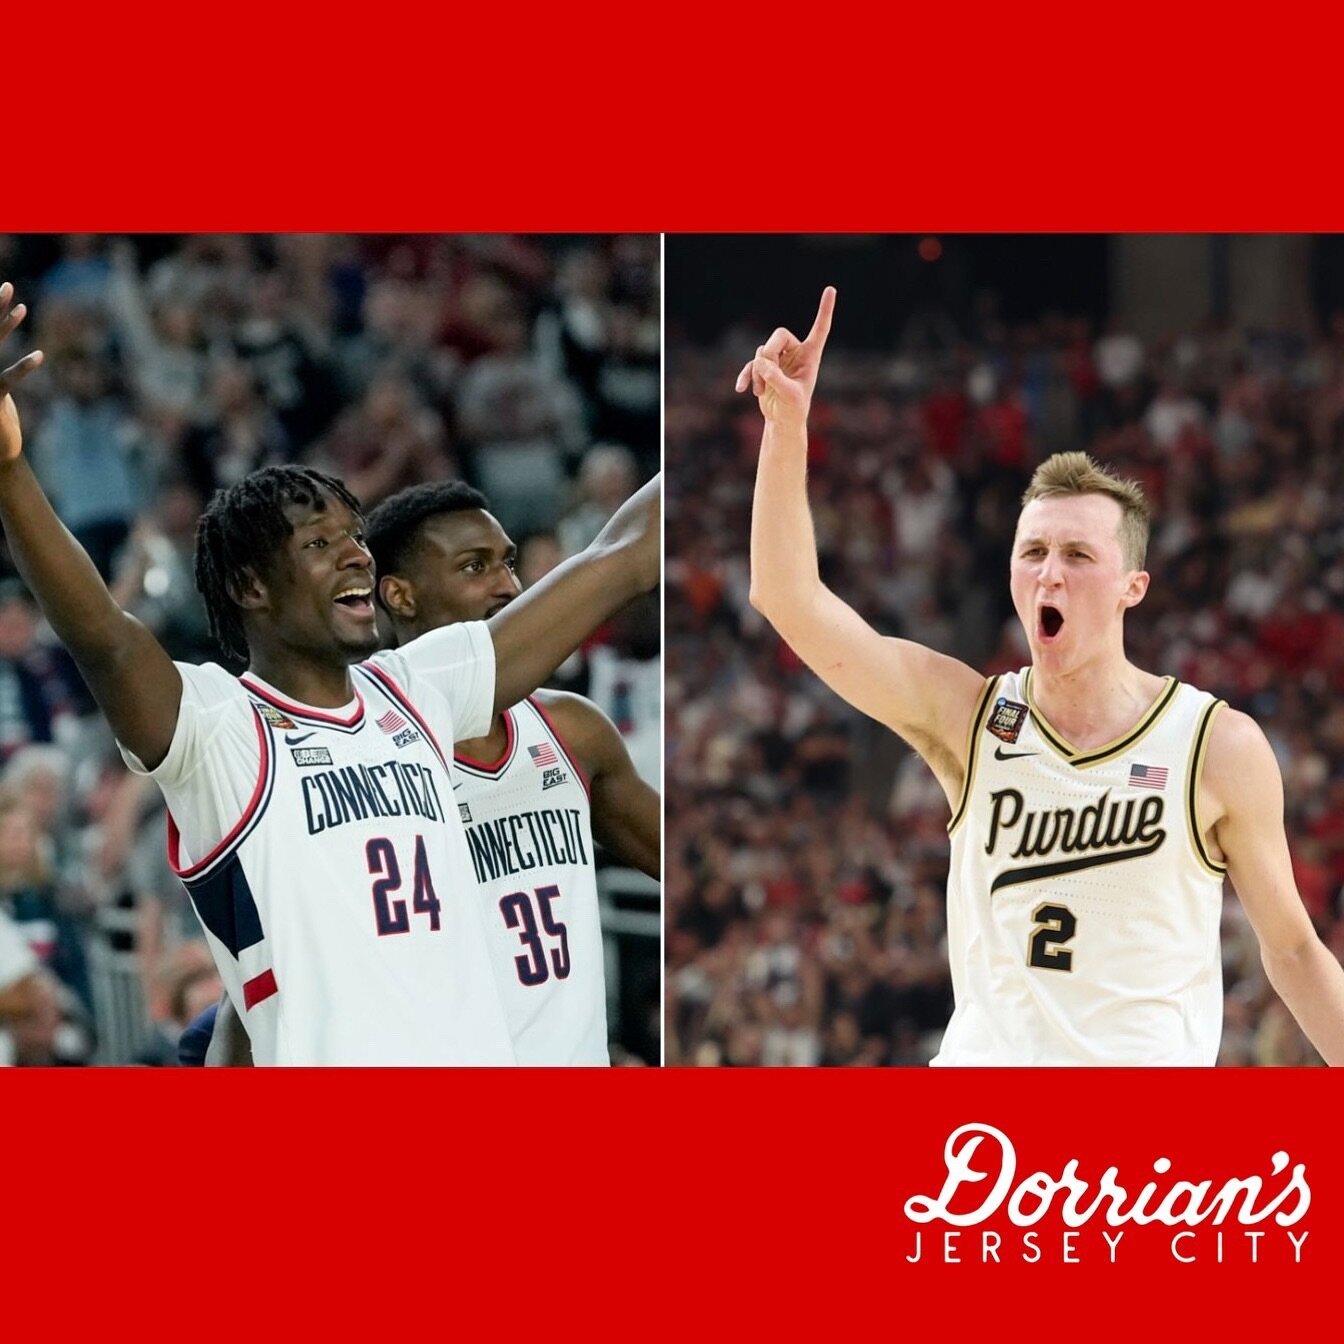 UConn v Purdue Monday 9:20pm. Reservations and walk-ins welcome. We&rsquo;ll be serving your favorite dishes and drinks check out our menu online.